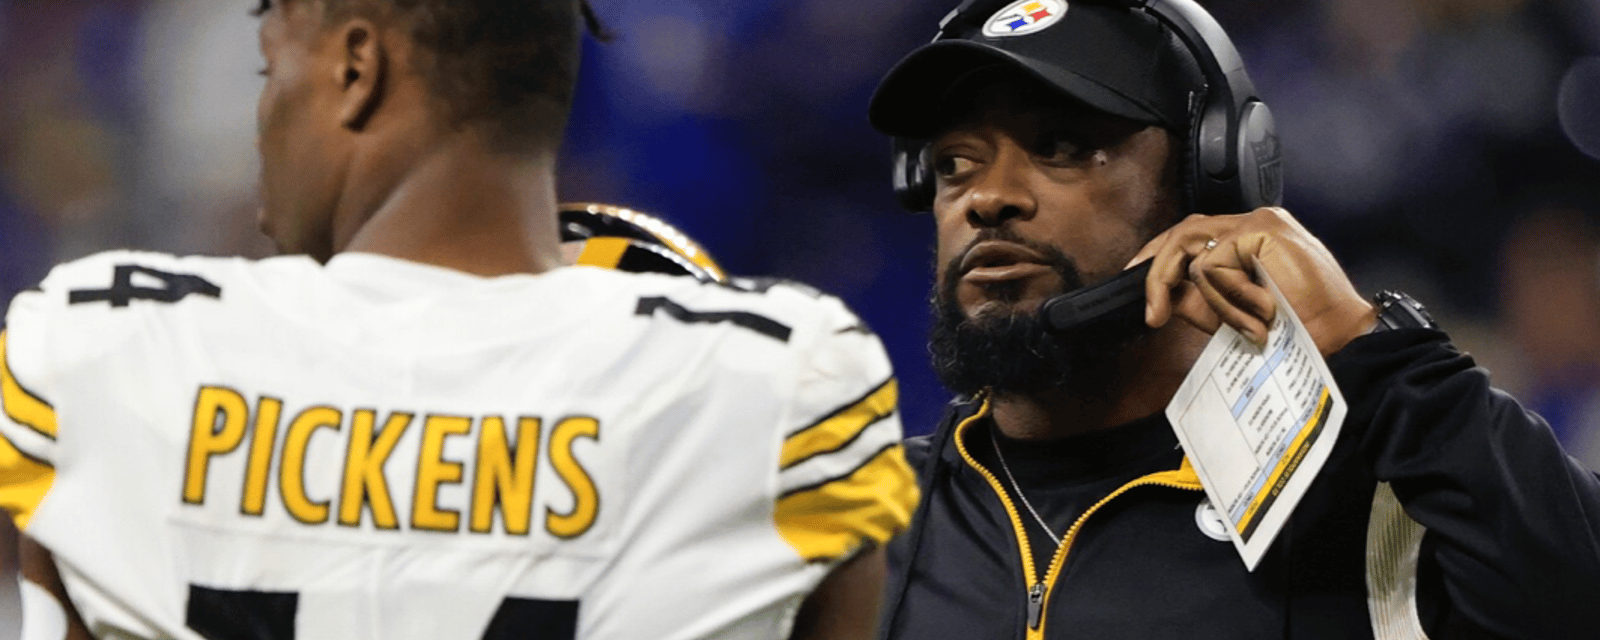 Mike Tomlin has harsh words for George Pickens 